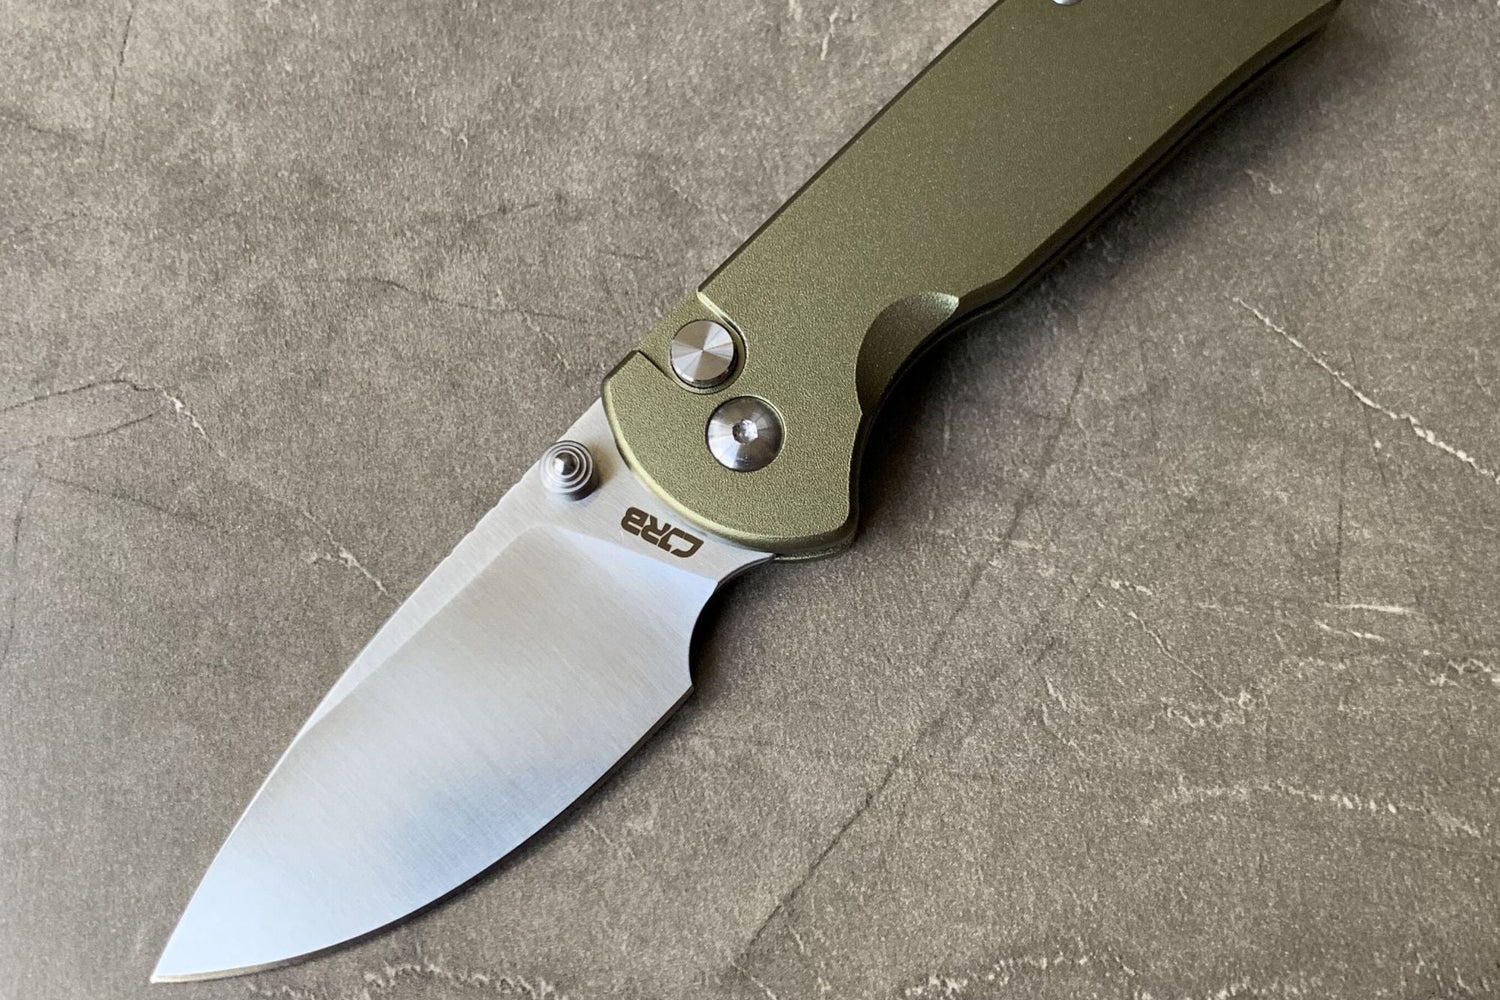 What Are the Main Parts of a Folding Knife?